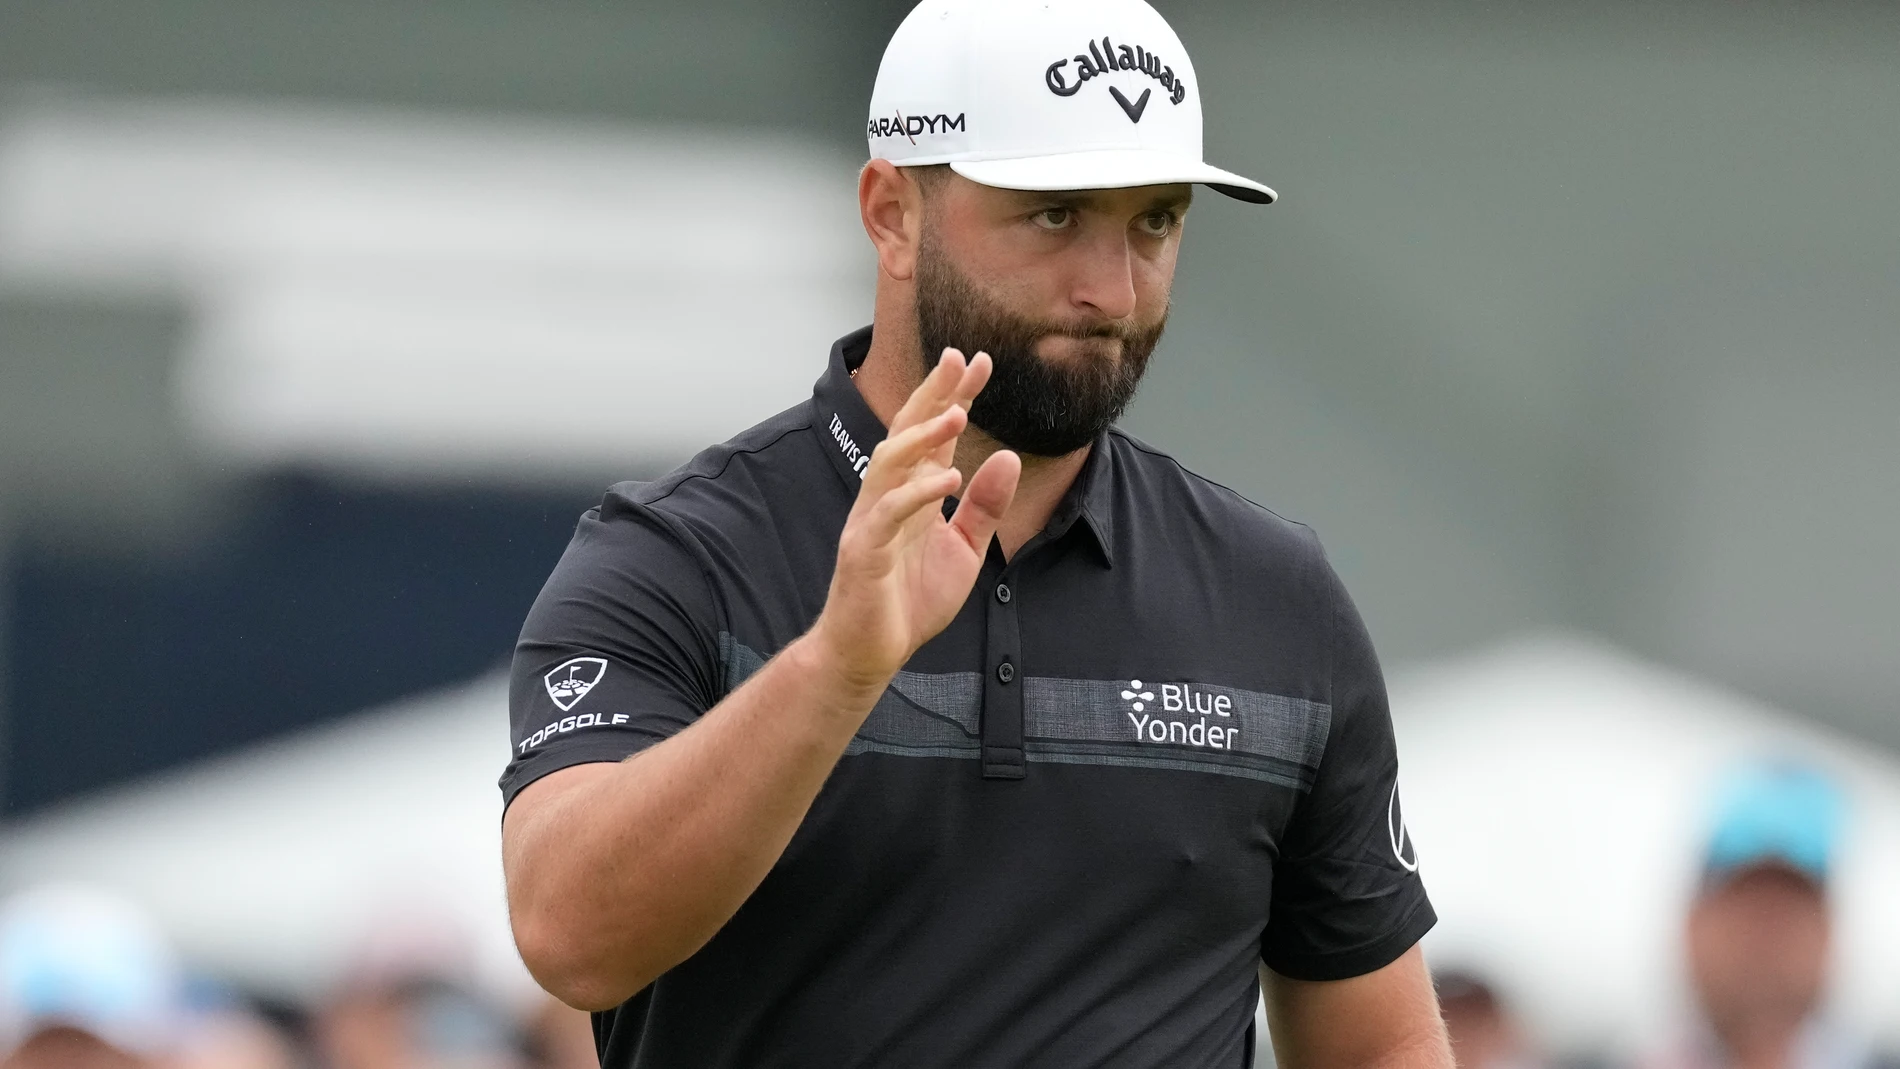 Jon Rahm waves after his putt on the 10th hole during the first round of the U.S. Open golf tournament at Los Angeles Country Club on Thursday, June 15, 2023, in Los Angeles. (AP Photo/Marcio J. Sanchez)